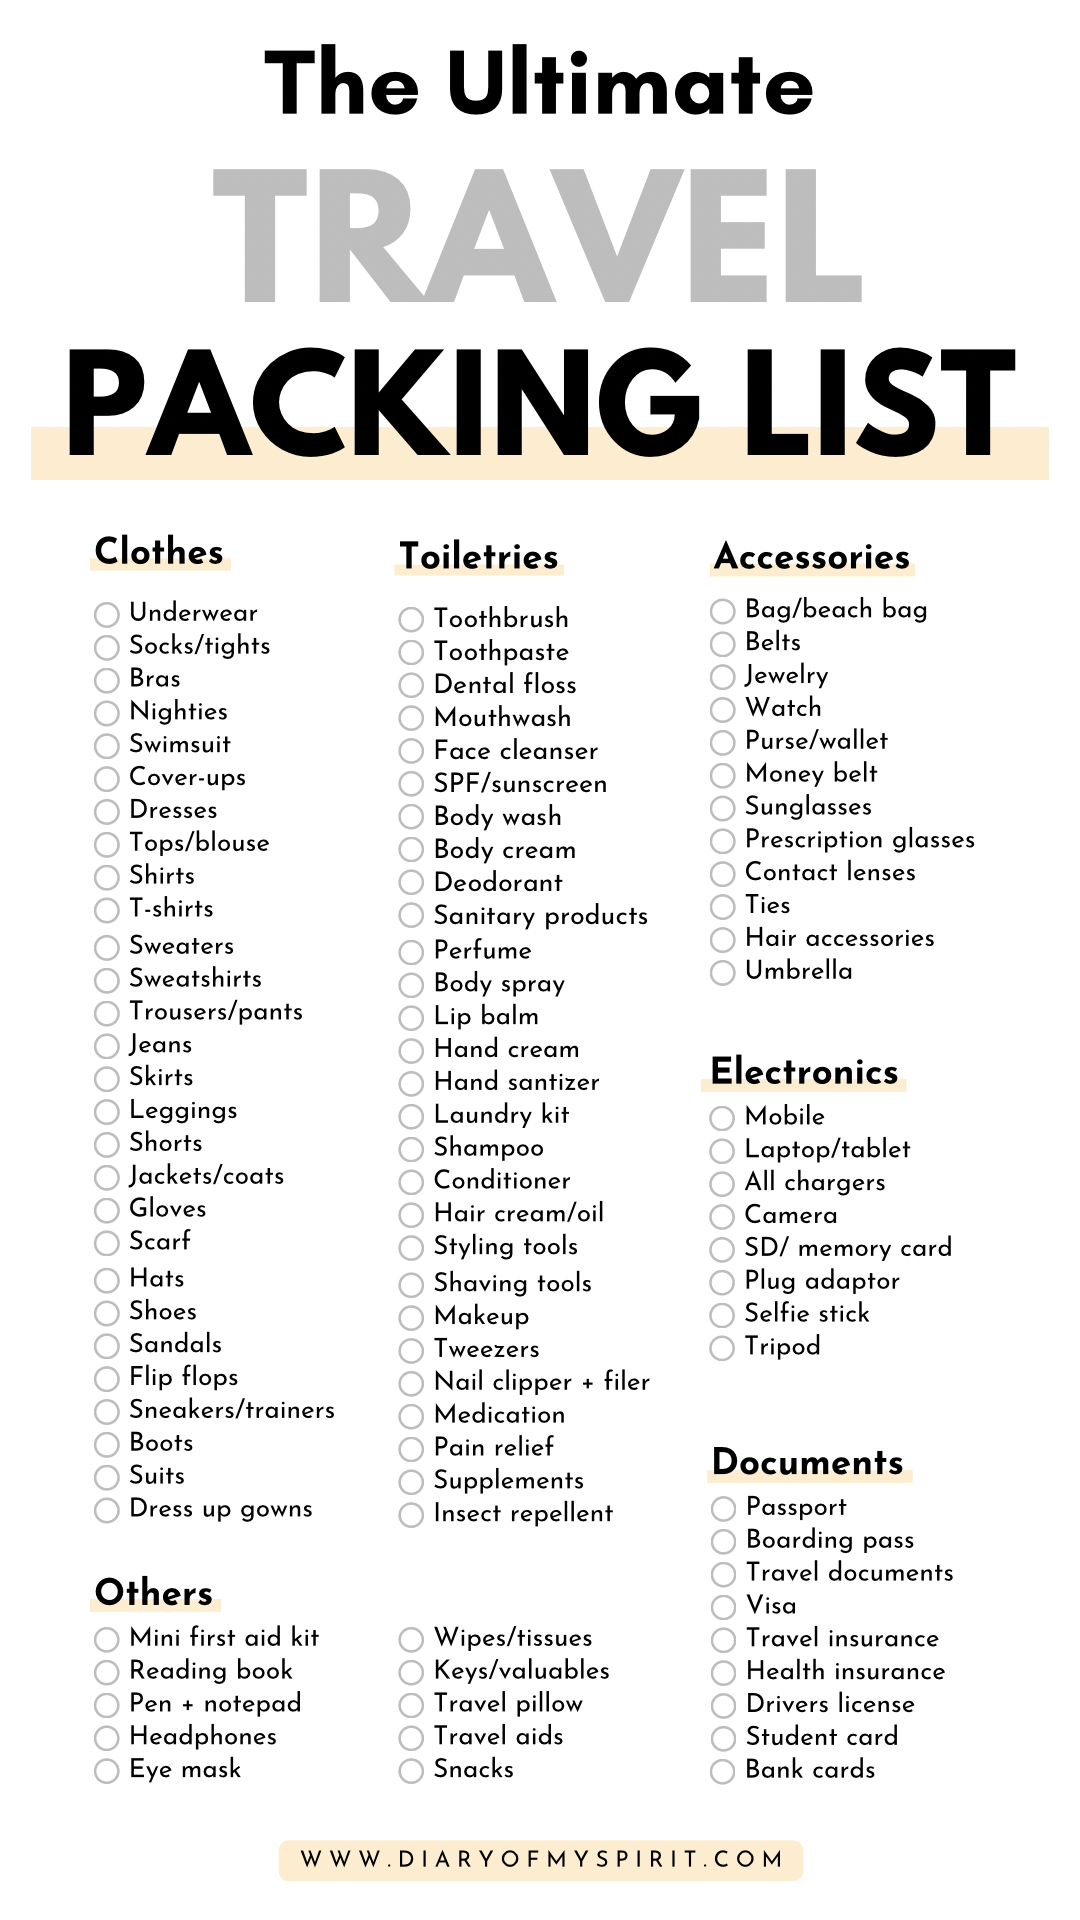 List of what to pack. Packing list for vacation. List for packing. Packing lists. List to pack for vacation. Packing list for a vacation. Packing vacation list. List of what to pack for vacation. Vacation packing list. List of what to pack for holiday. Traveling essentials. Travel pack list. Travelling checklist. travelling packing list. Travel checklist. What to pack checklist